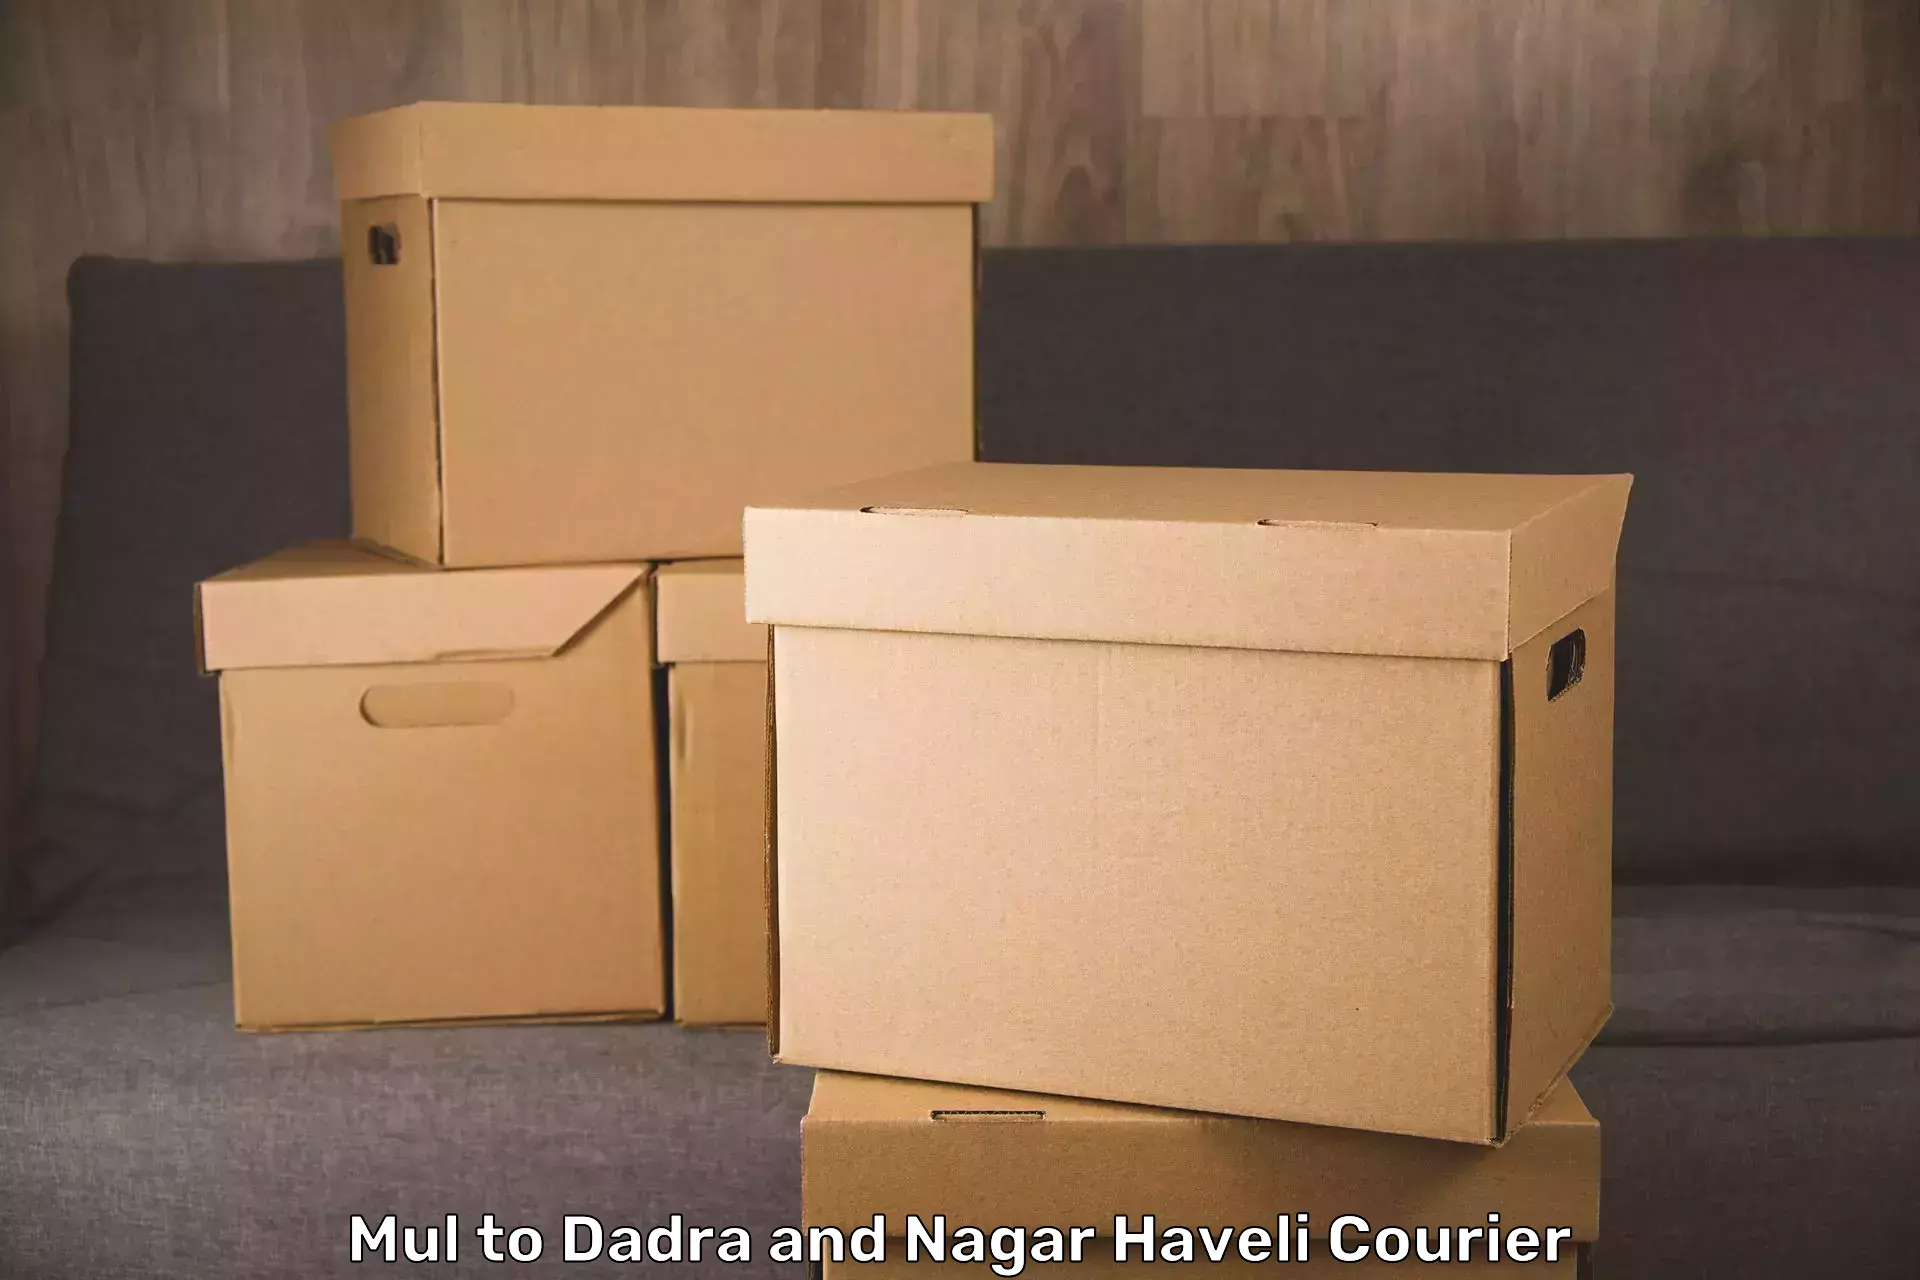 Airport luggage delivery Mul to Dadra and Nagar Haveli